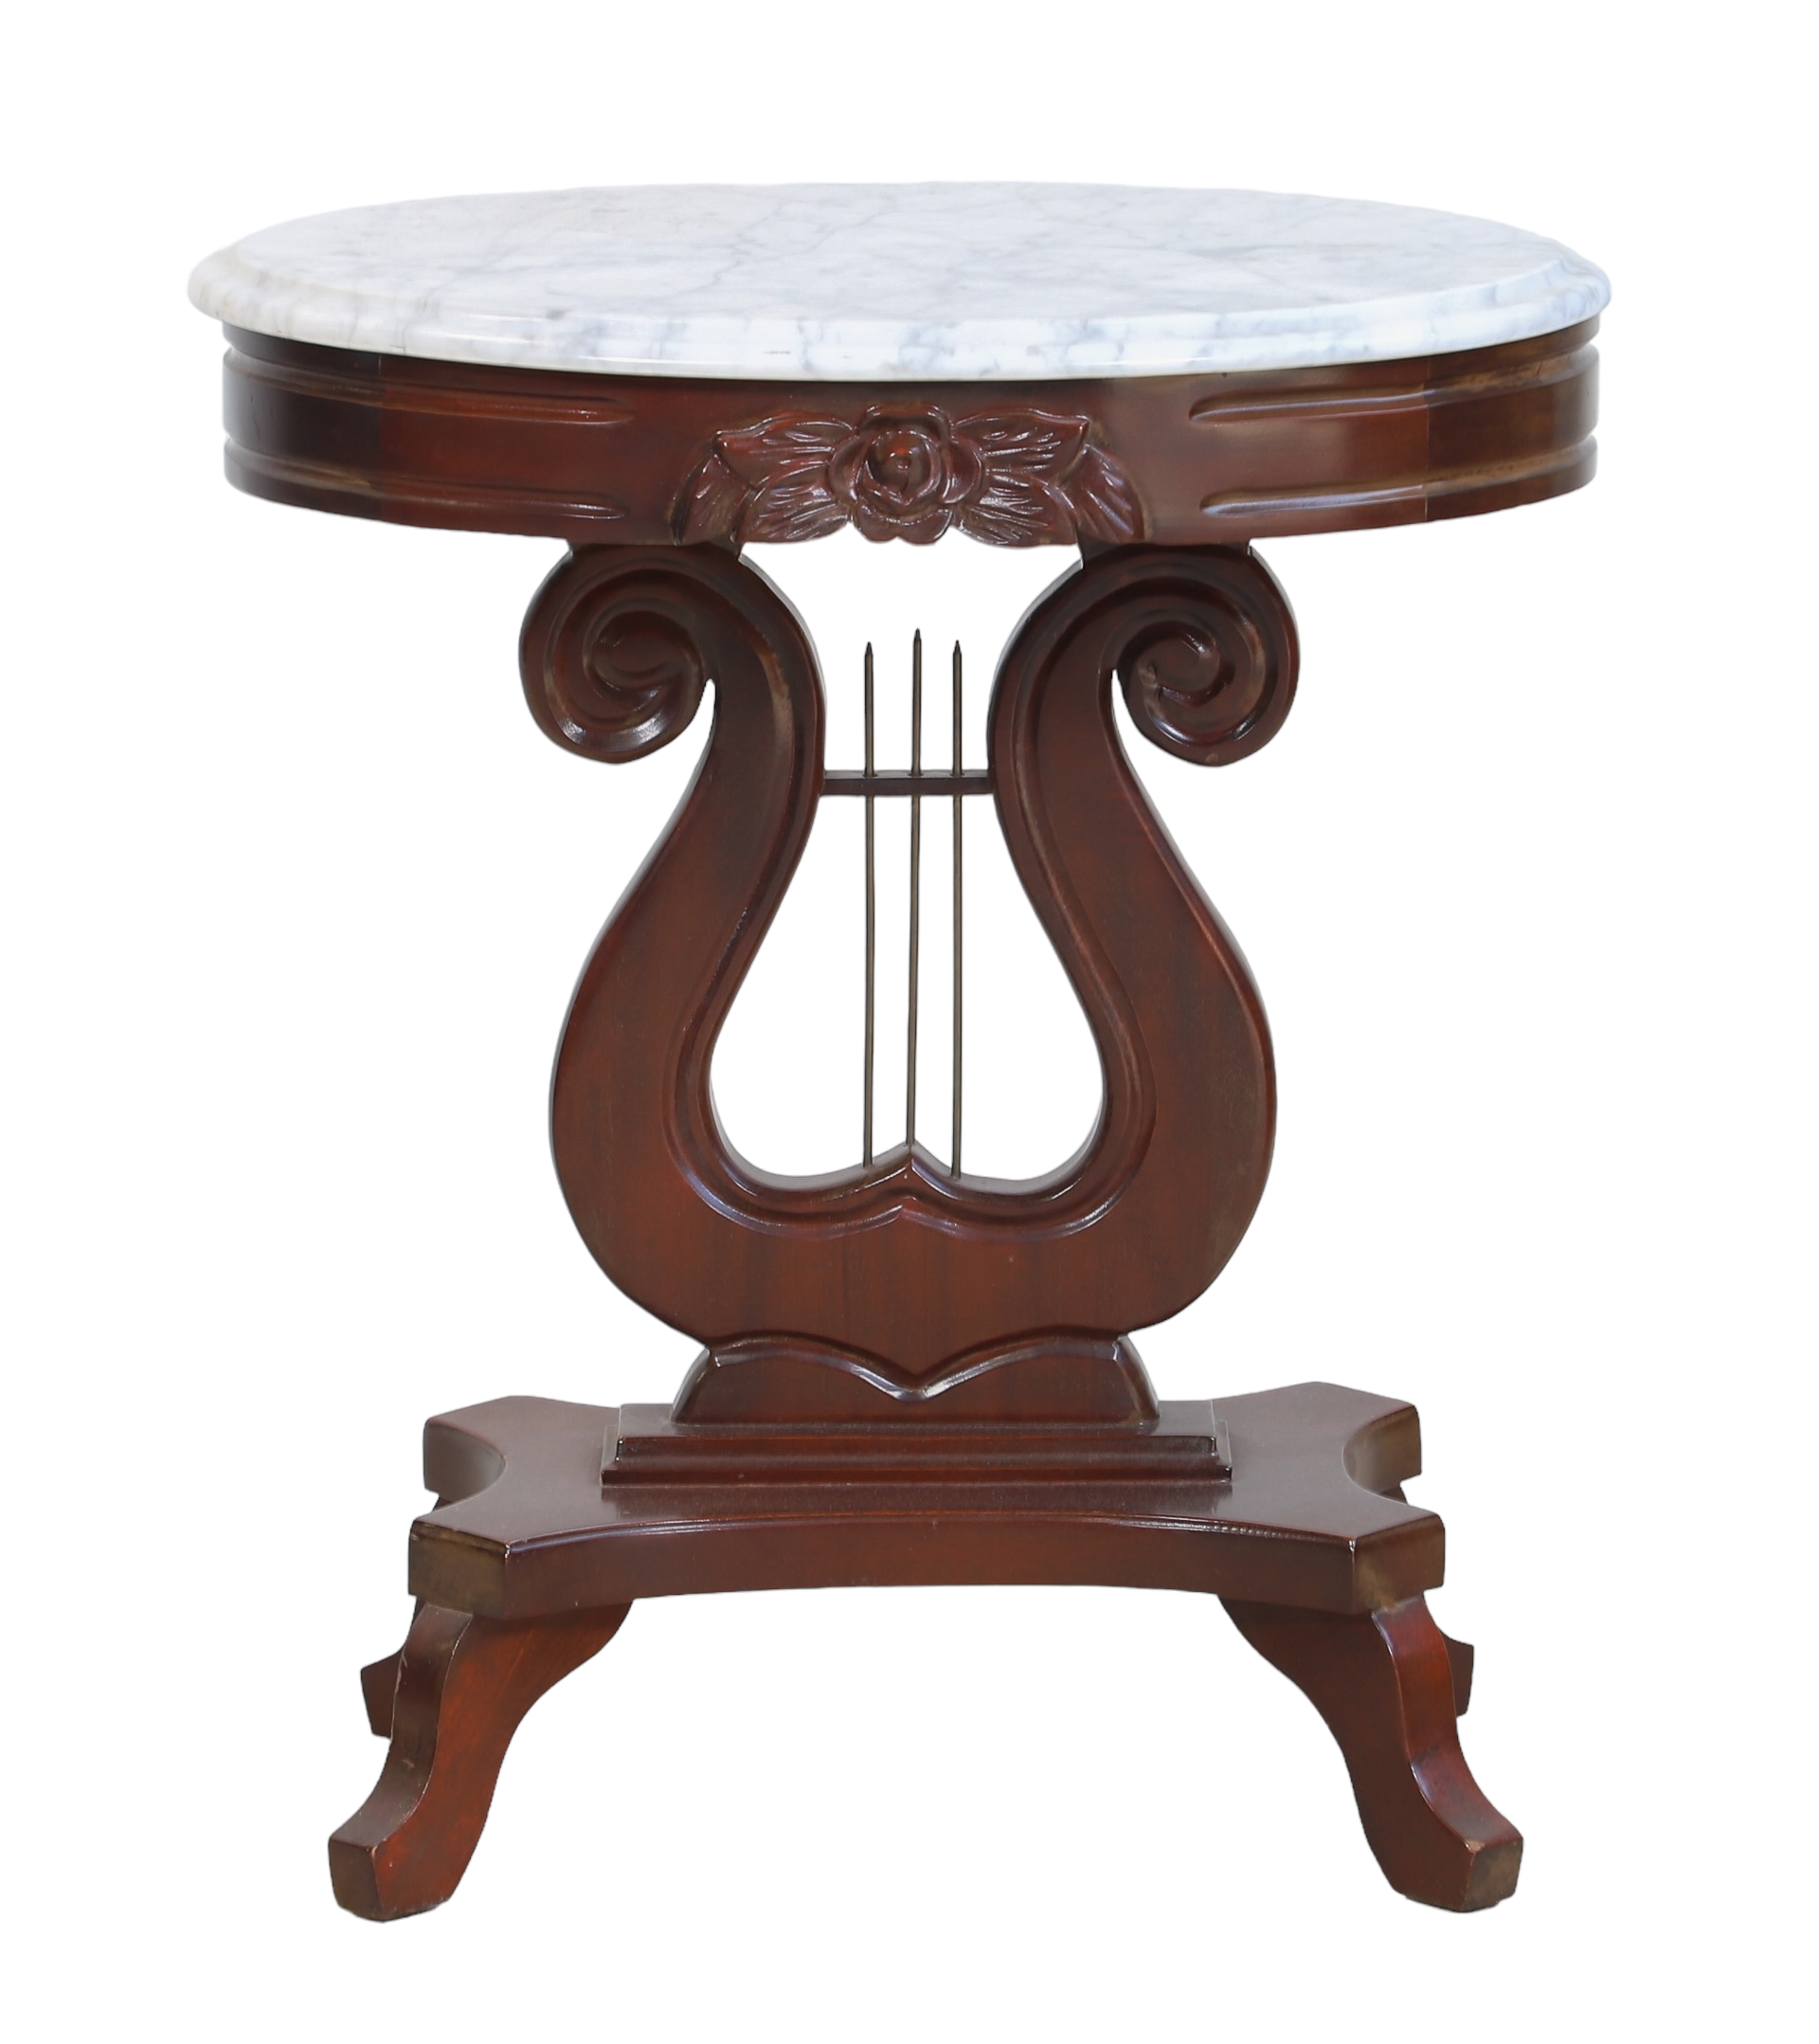 Victorian style marbletop side